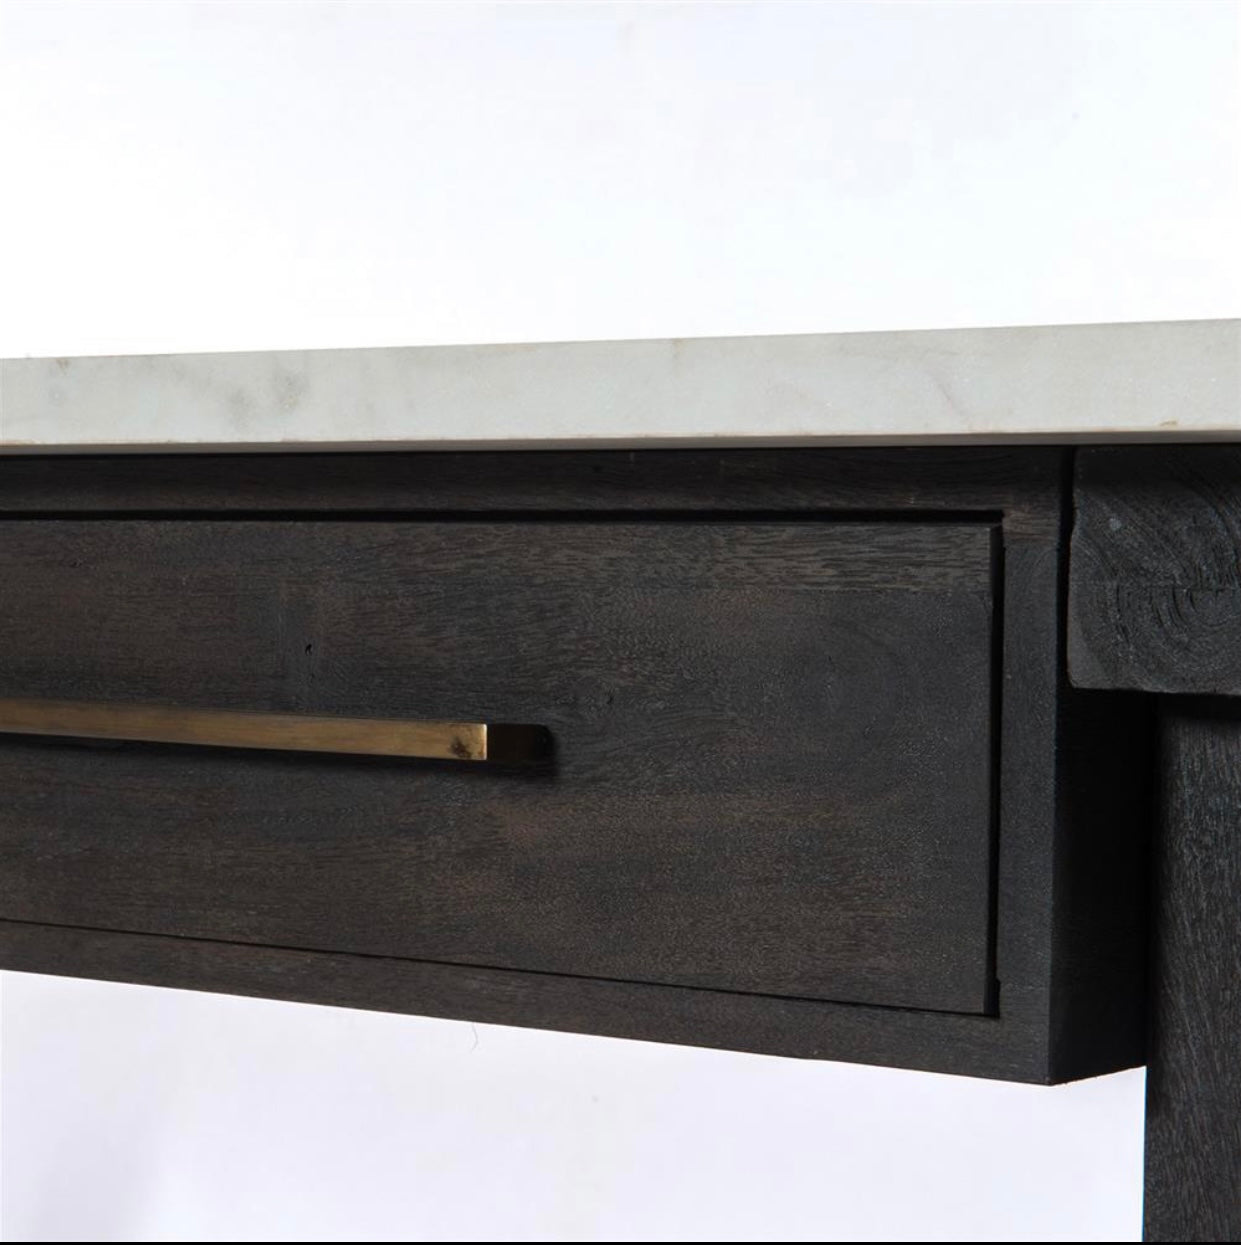 Sophisticated material mixes bring a classic French feel to the contemporary kitchen. Coalfinished mango wood supports a top of polished white marble for a clean look with alluring contrast, plus brass drawer pulls for vintage vibes.   36 inches high x 60 inches wide x 36 inches deep Constructed from acacia wood and marble Finished in black wood Features a coal-finished mango wood support a top of polished white marble Brass drawer pulls Weight: 353.4 pounds